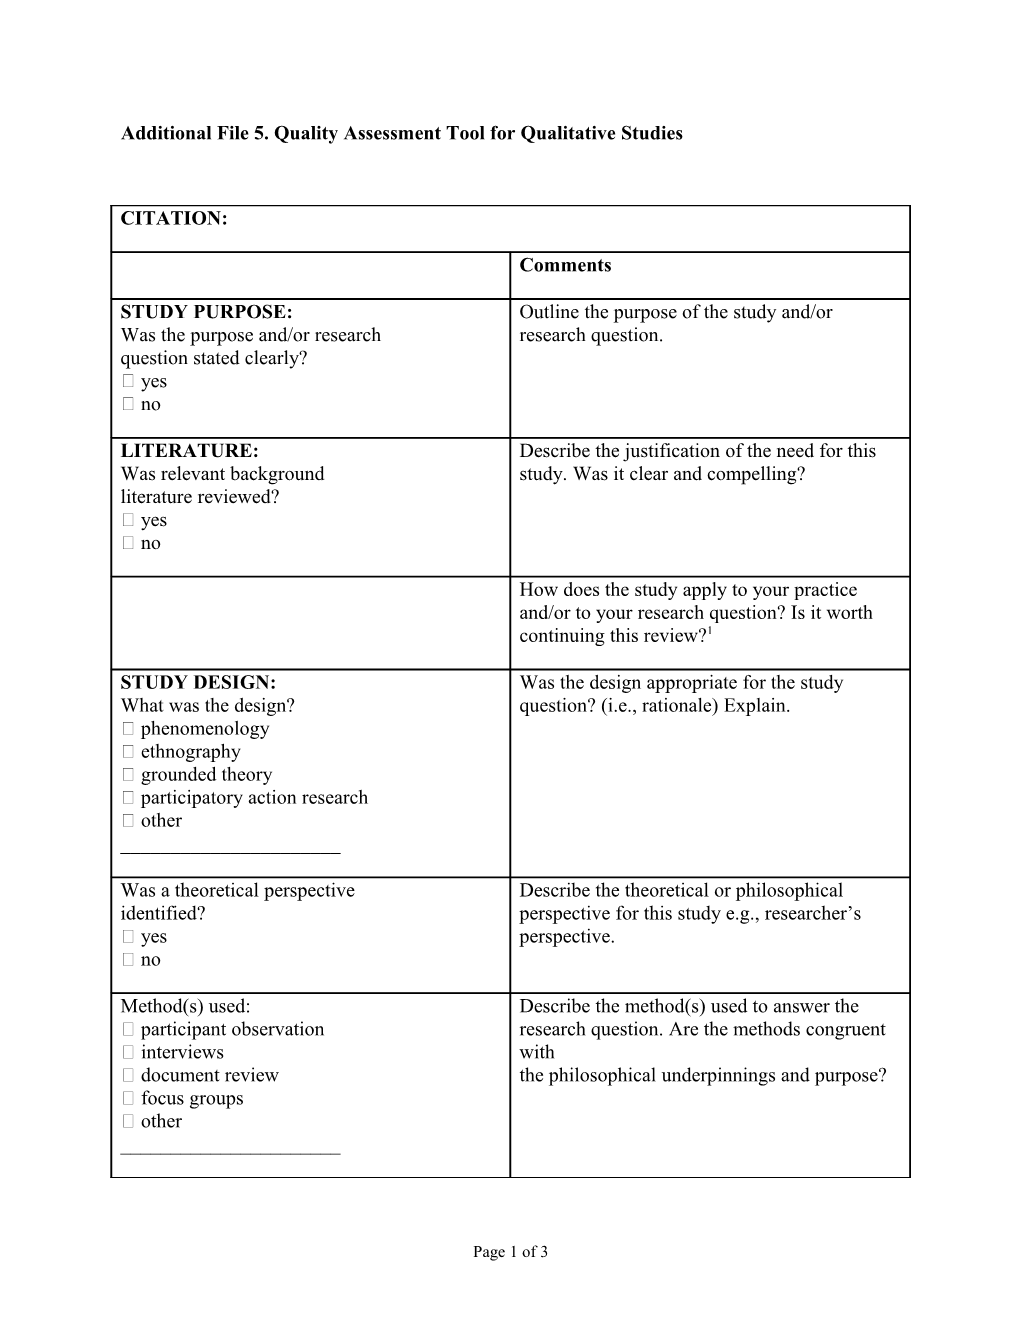 Additional File 5. Quality Assessment Tool for Qualitative Studies